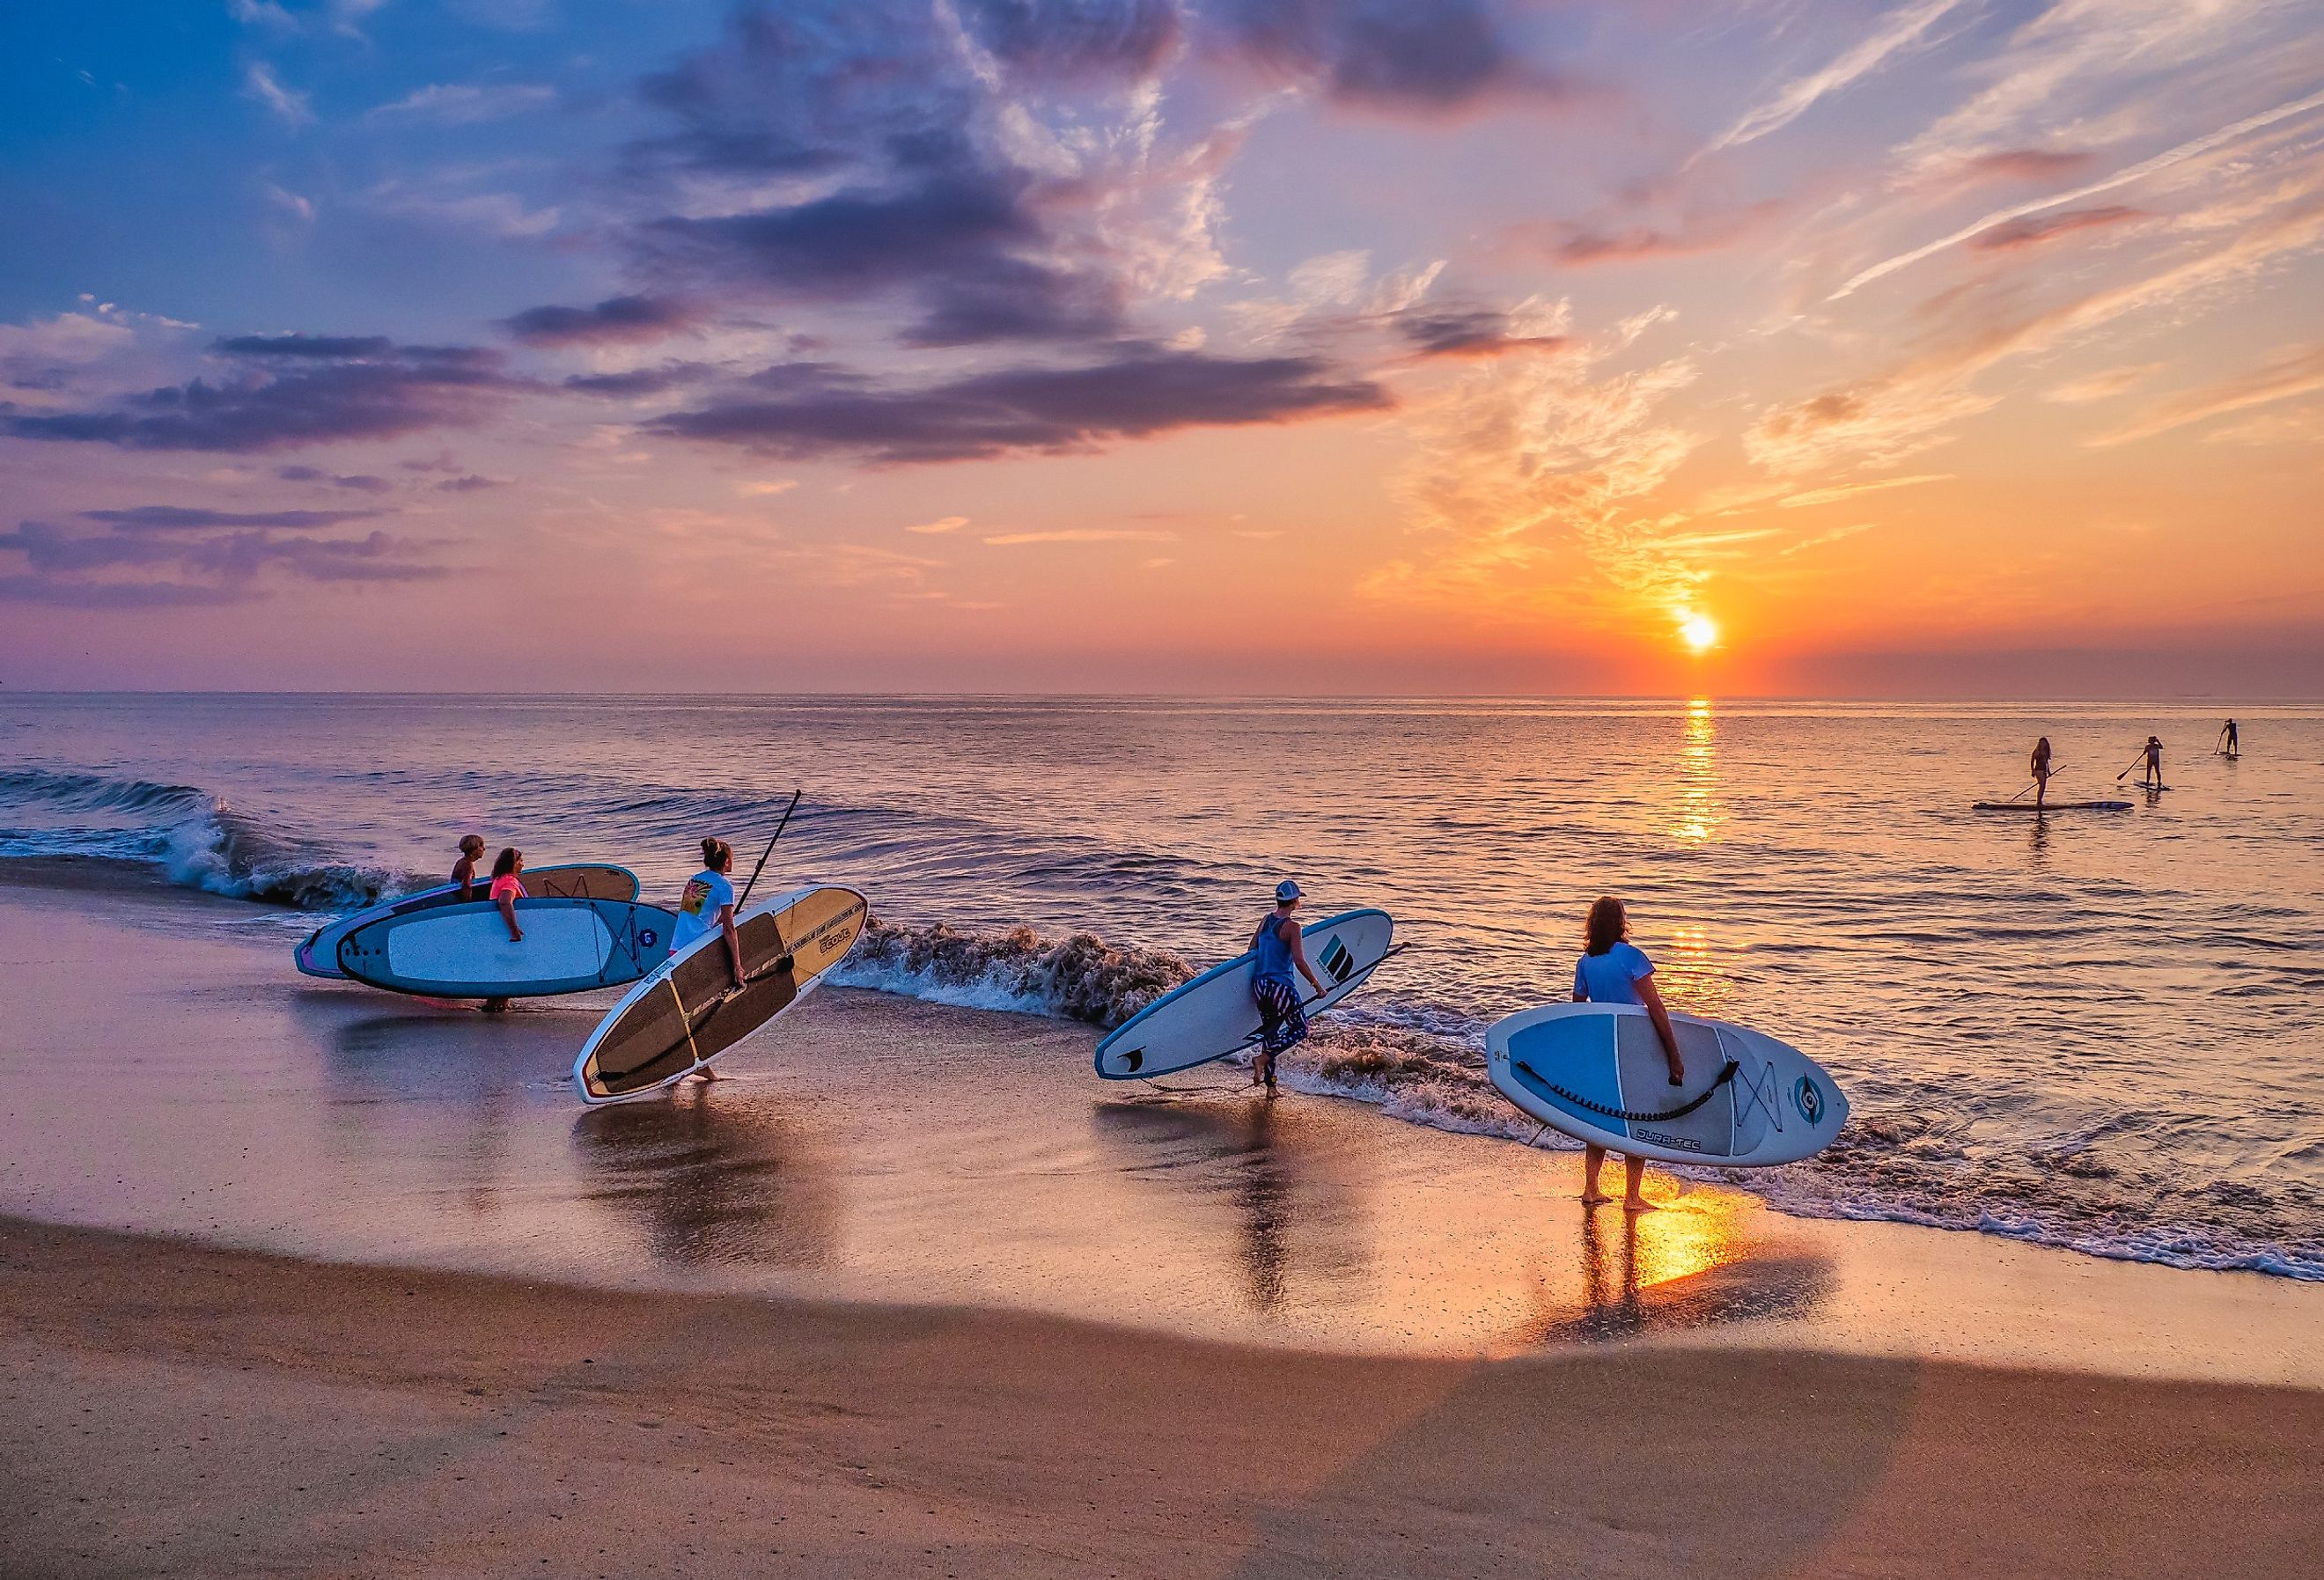 A group of outdoor enthusiasts take their paddle boards out at sunrise in Bethany Beach, Delaware.